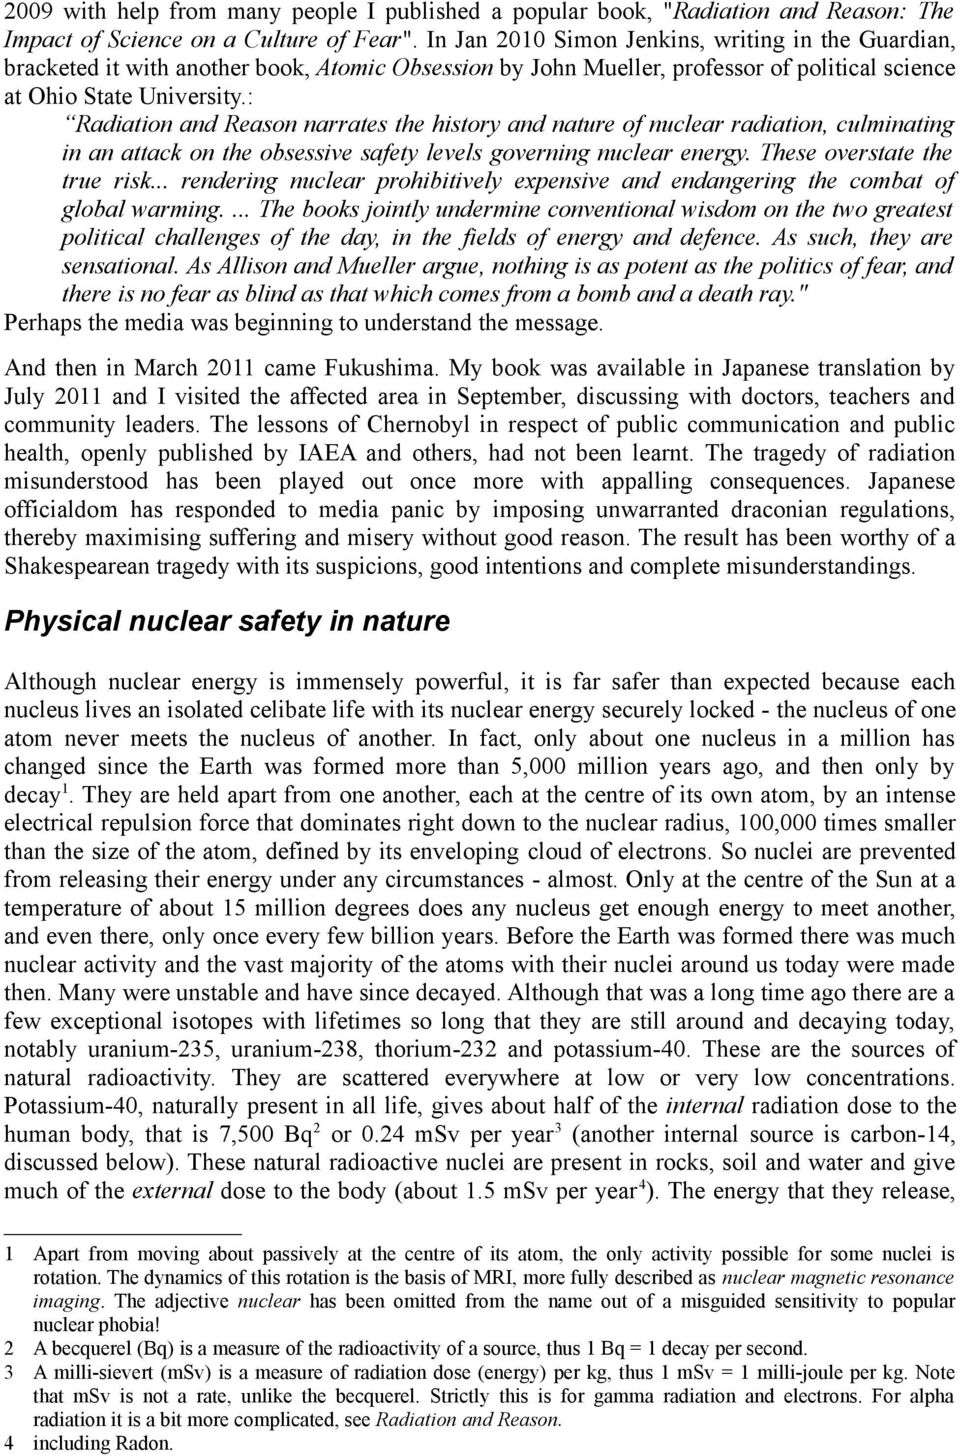 : Radiation and Reason narrates the history and nature of nuclear radiation, culminating in an attack on the obsessive safety levels governing nuclear energy. These overstate the true risk.